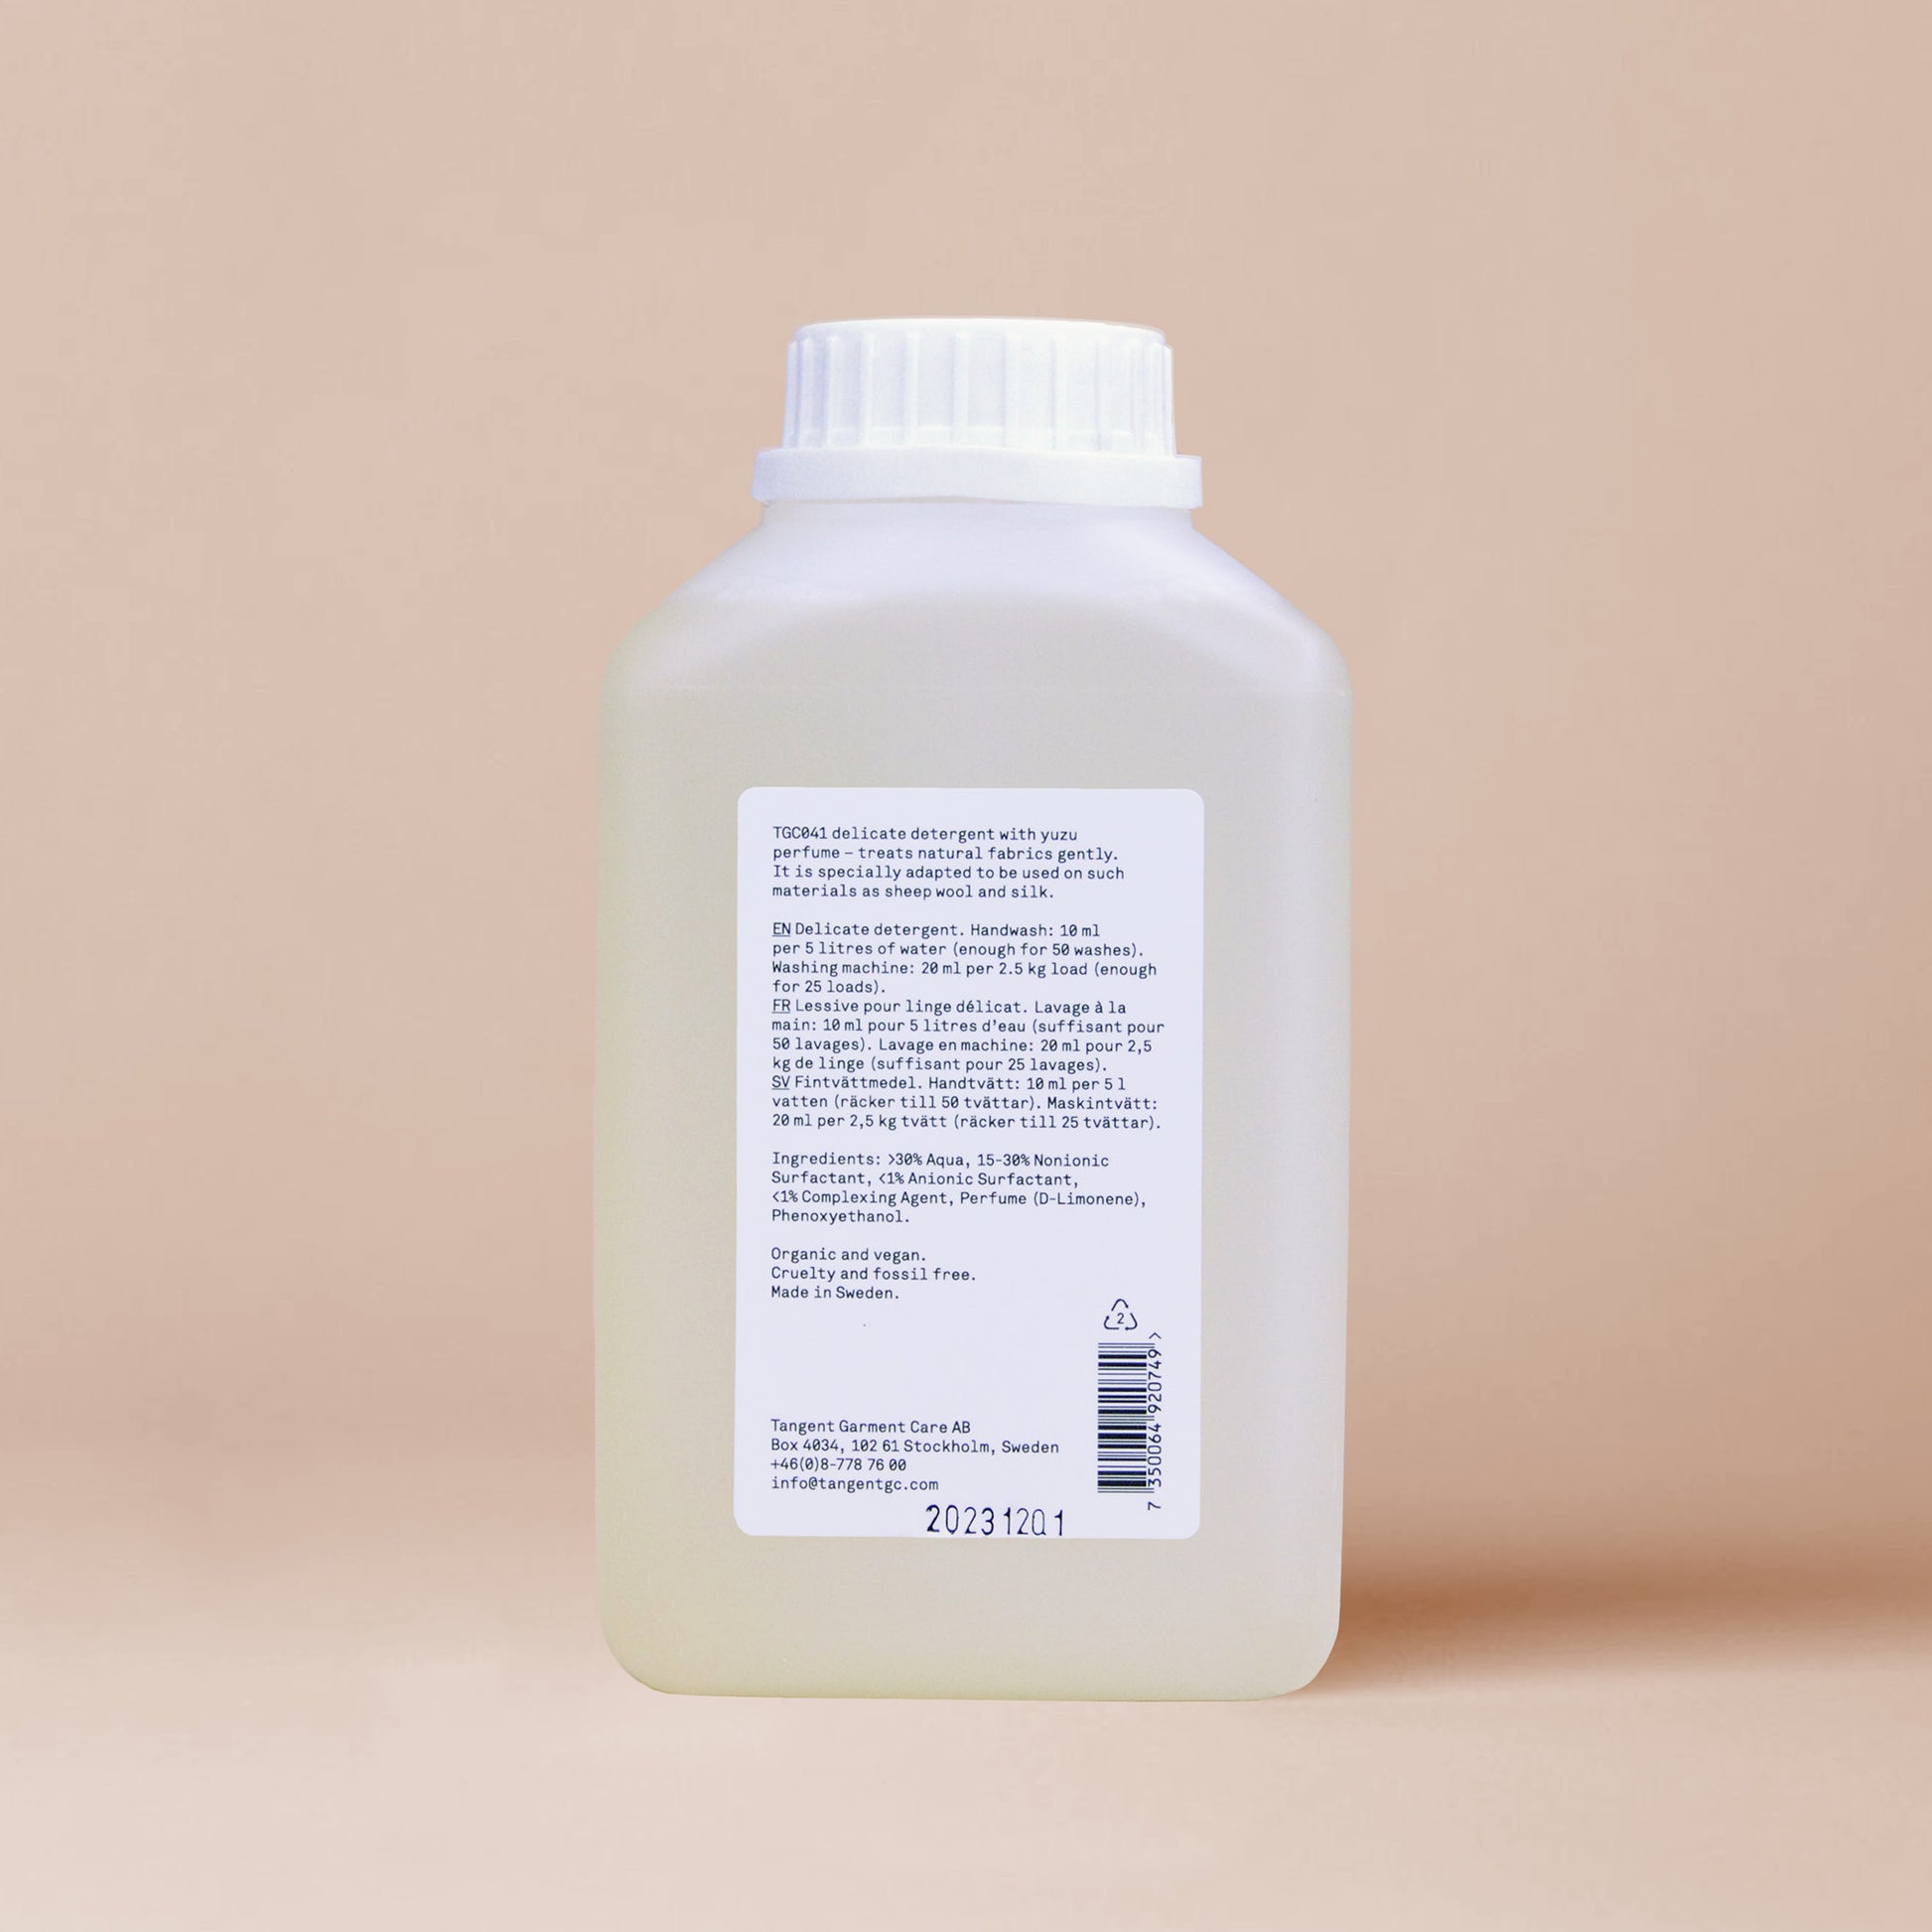 The back of an elegant bottle of yuzu delicate detergent from Tangent Garment Care with ingredient info and usage instructions